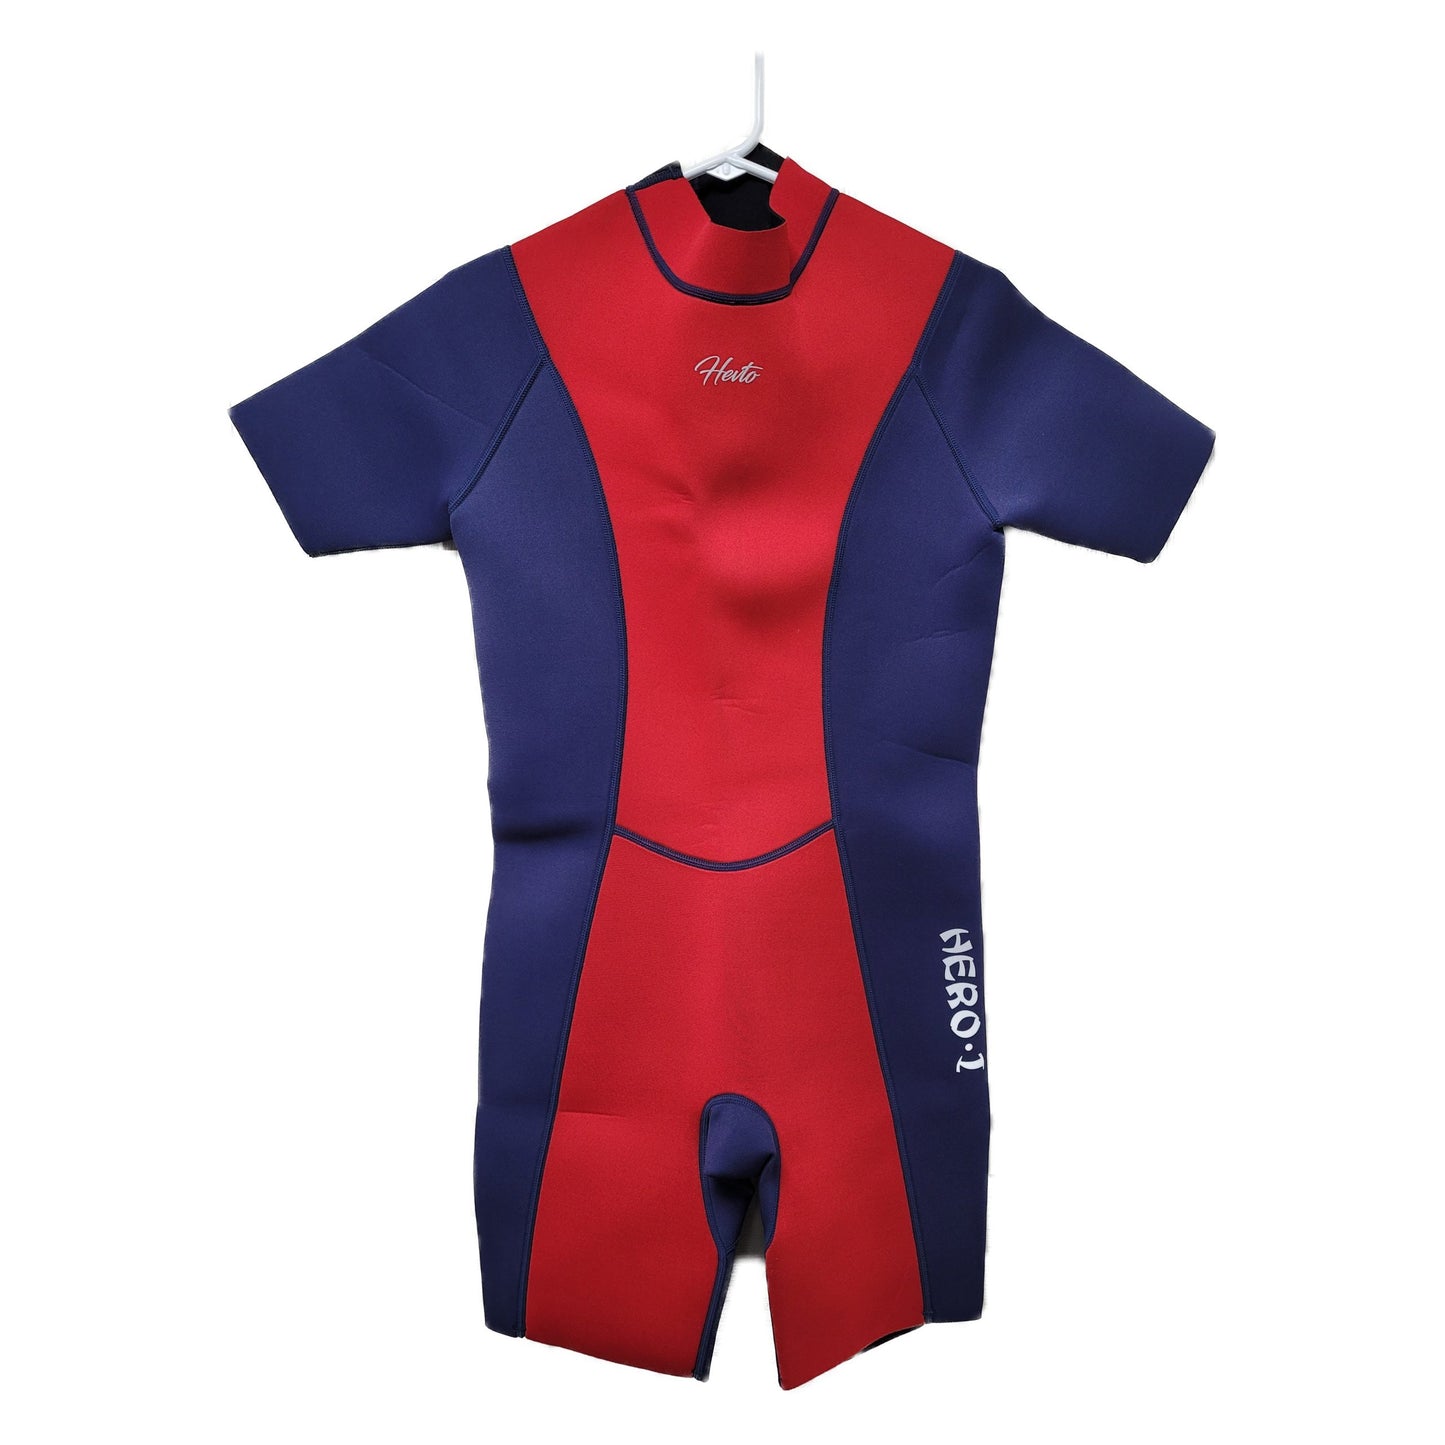 Hevto Youth 3/2mm Shorty Wetsuit "18"